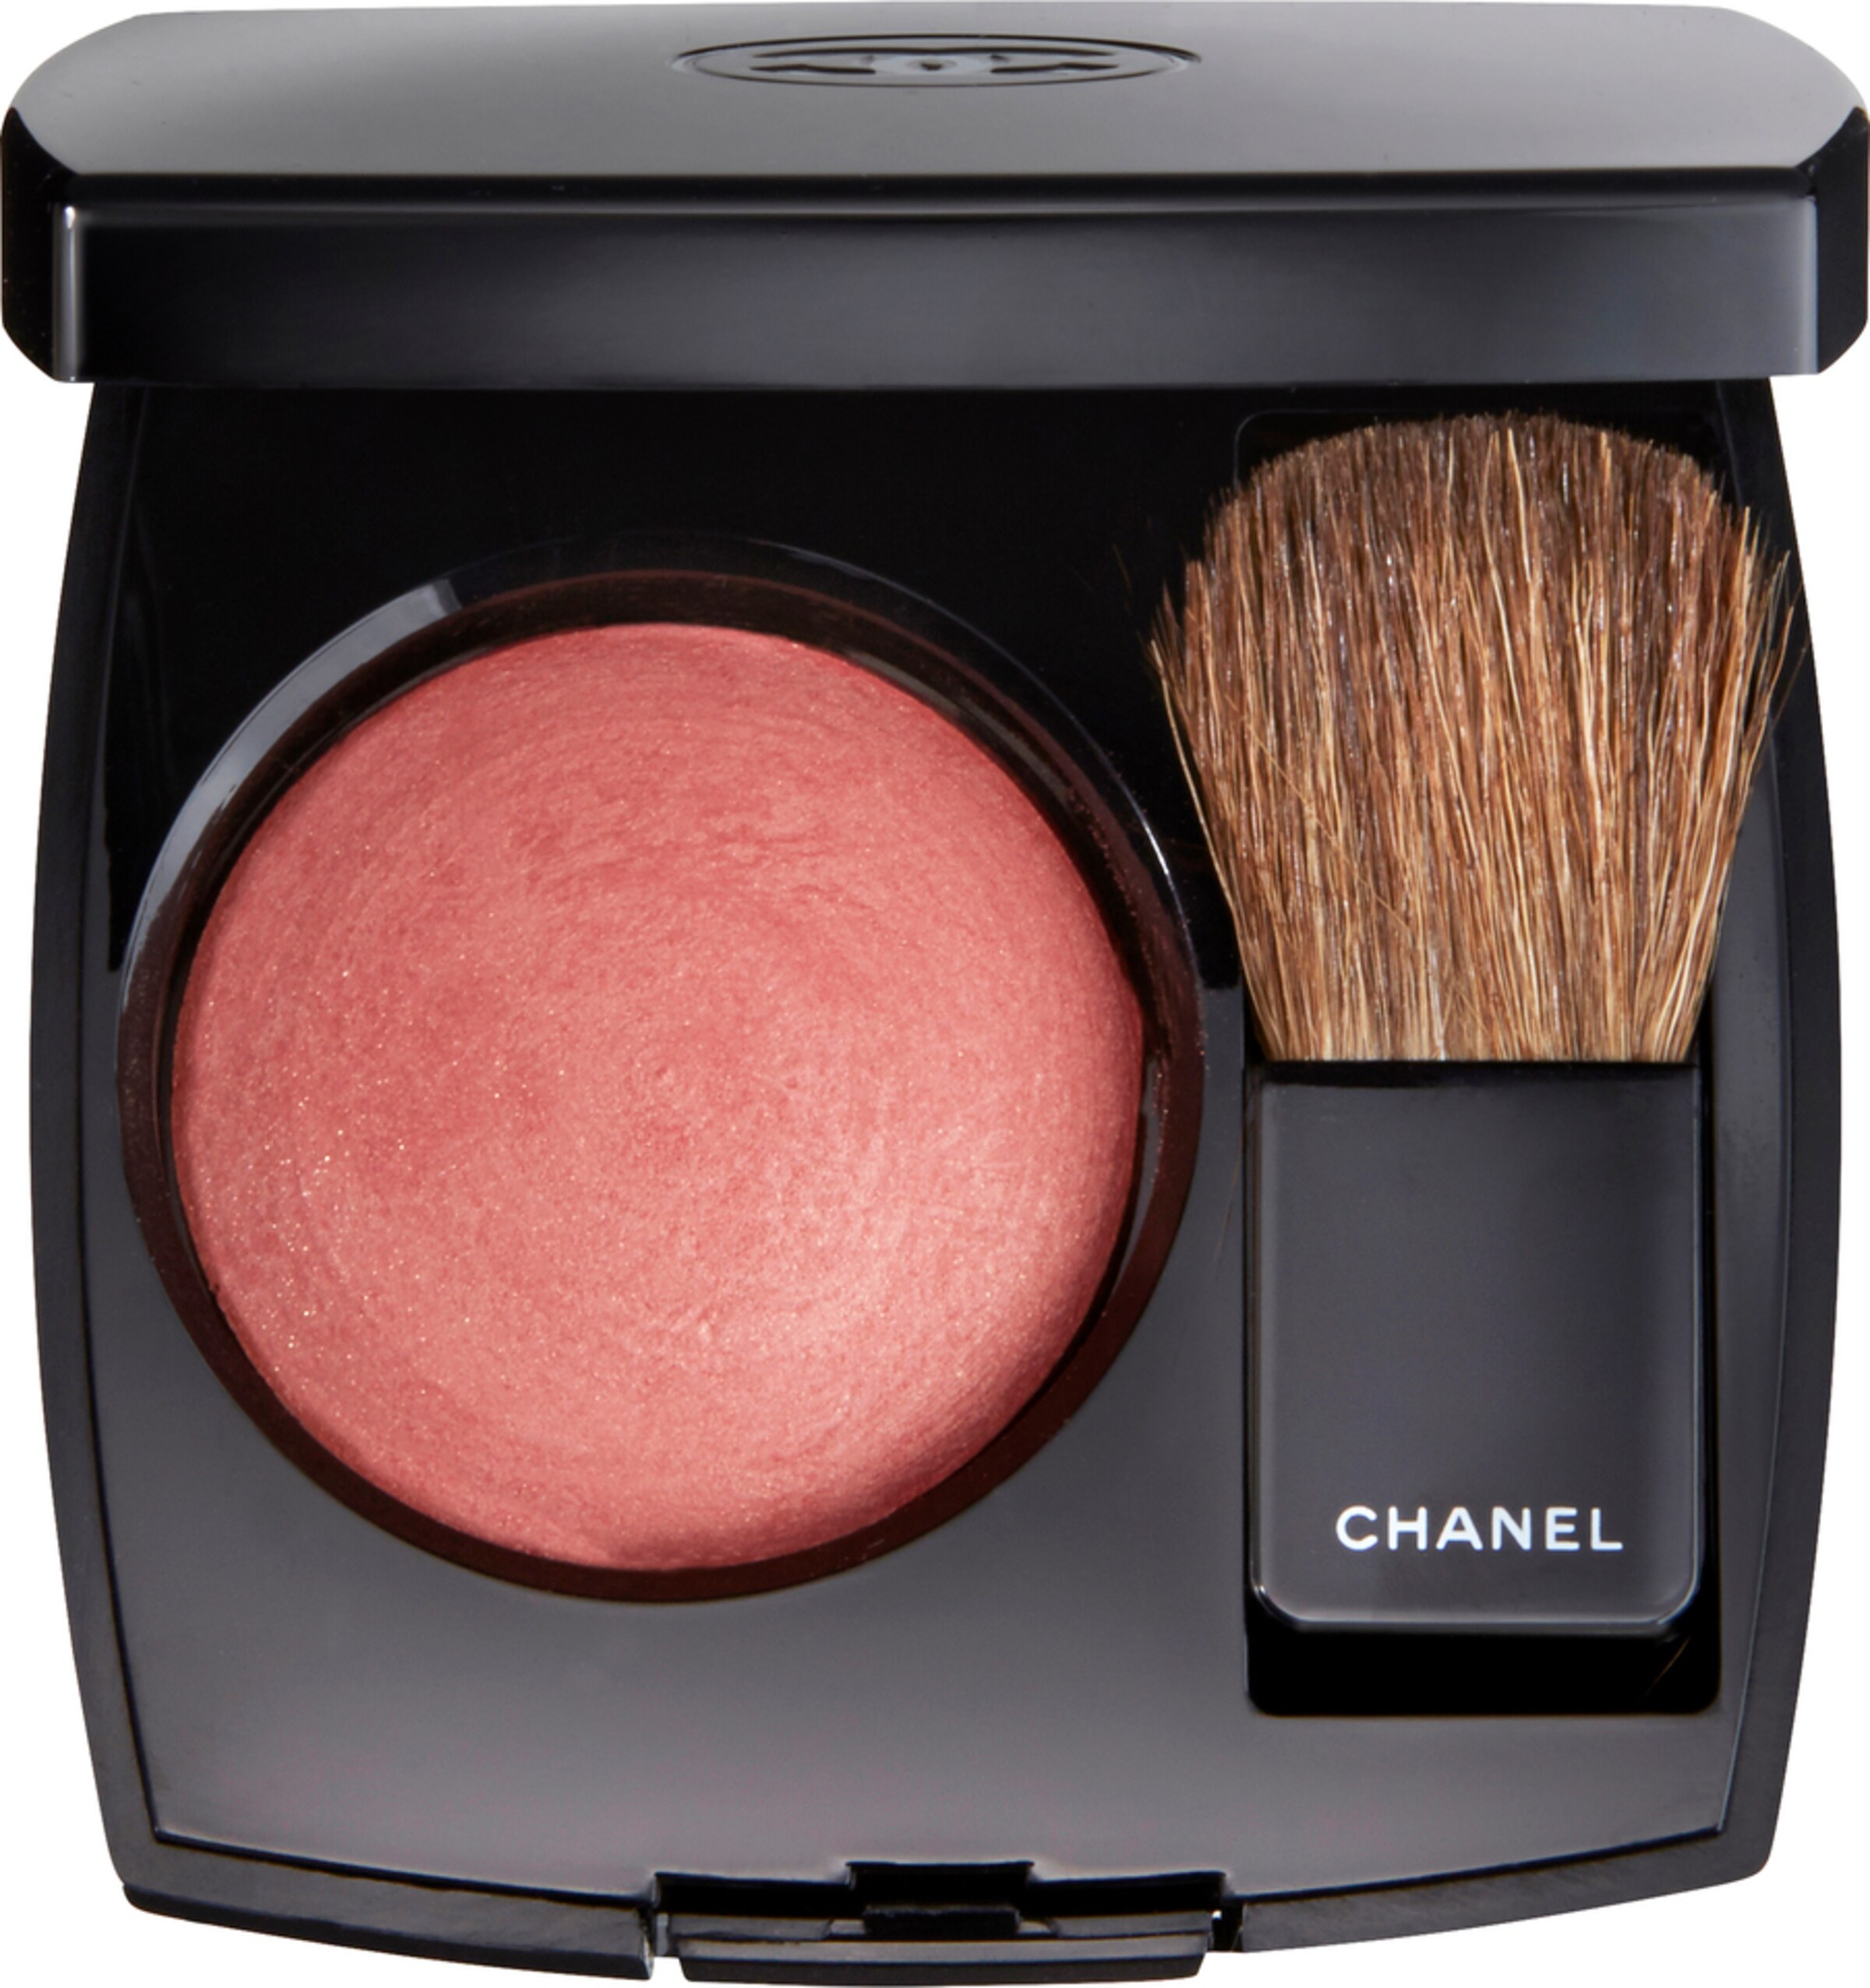 CHANEL Joues Contraste Rouge in Pastellrot 